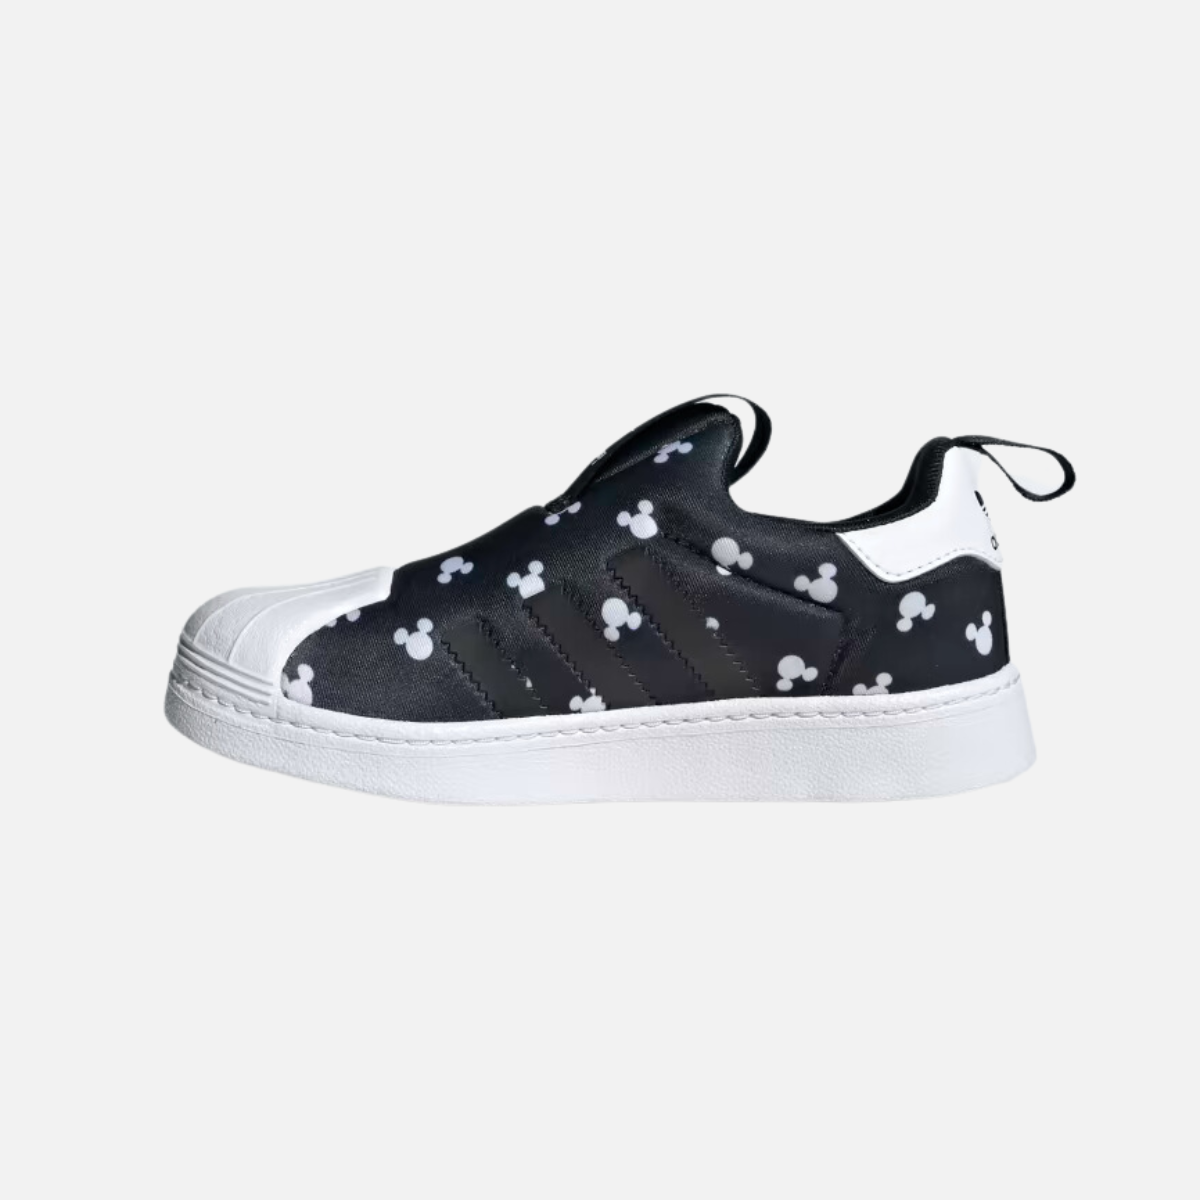 Adidas SUPERSTAR 360 Kids Unisex Shoes BOY AND GIRL (4-7 YEAR) -Core Black/Cloud White/Core Black